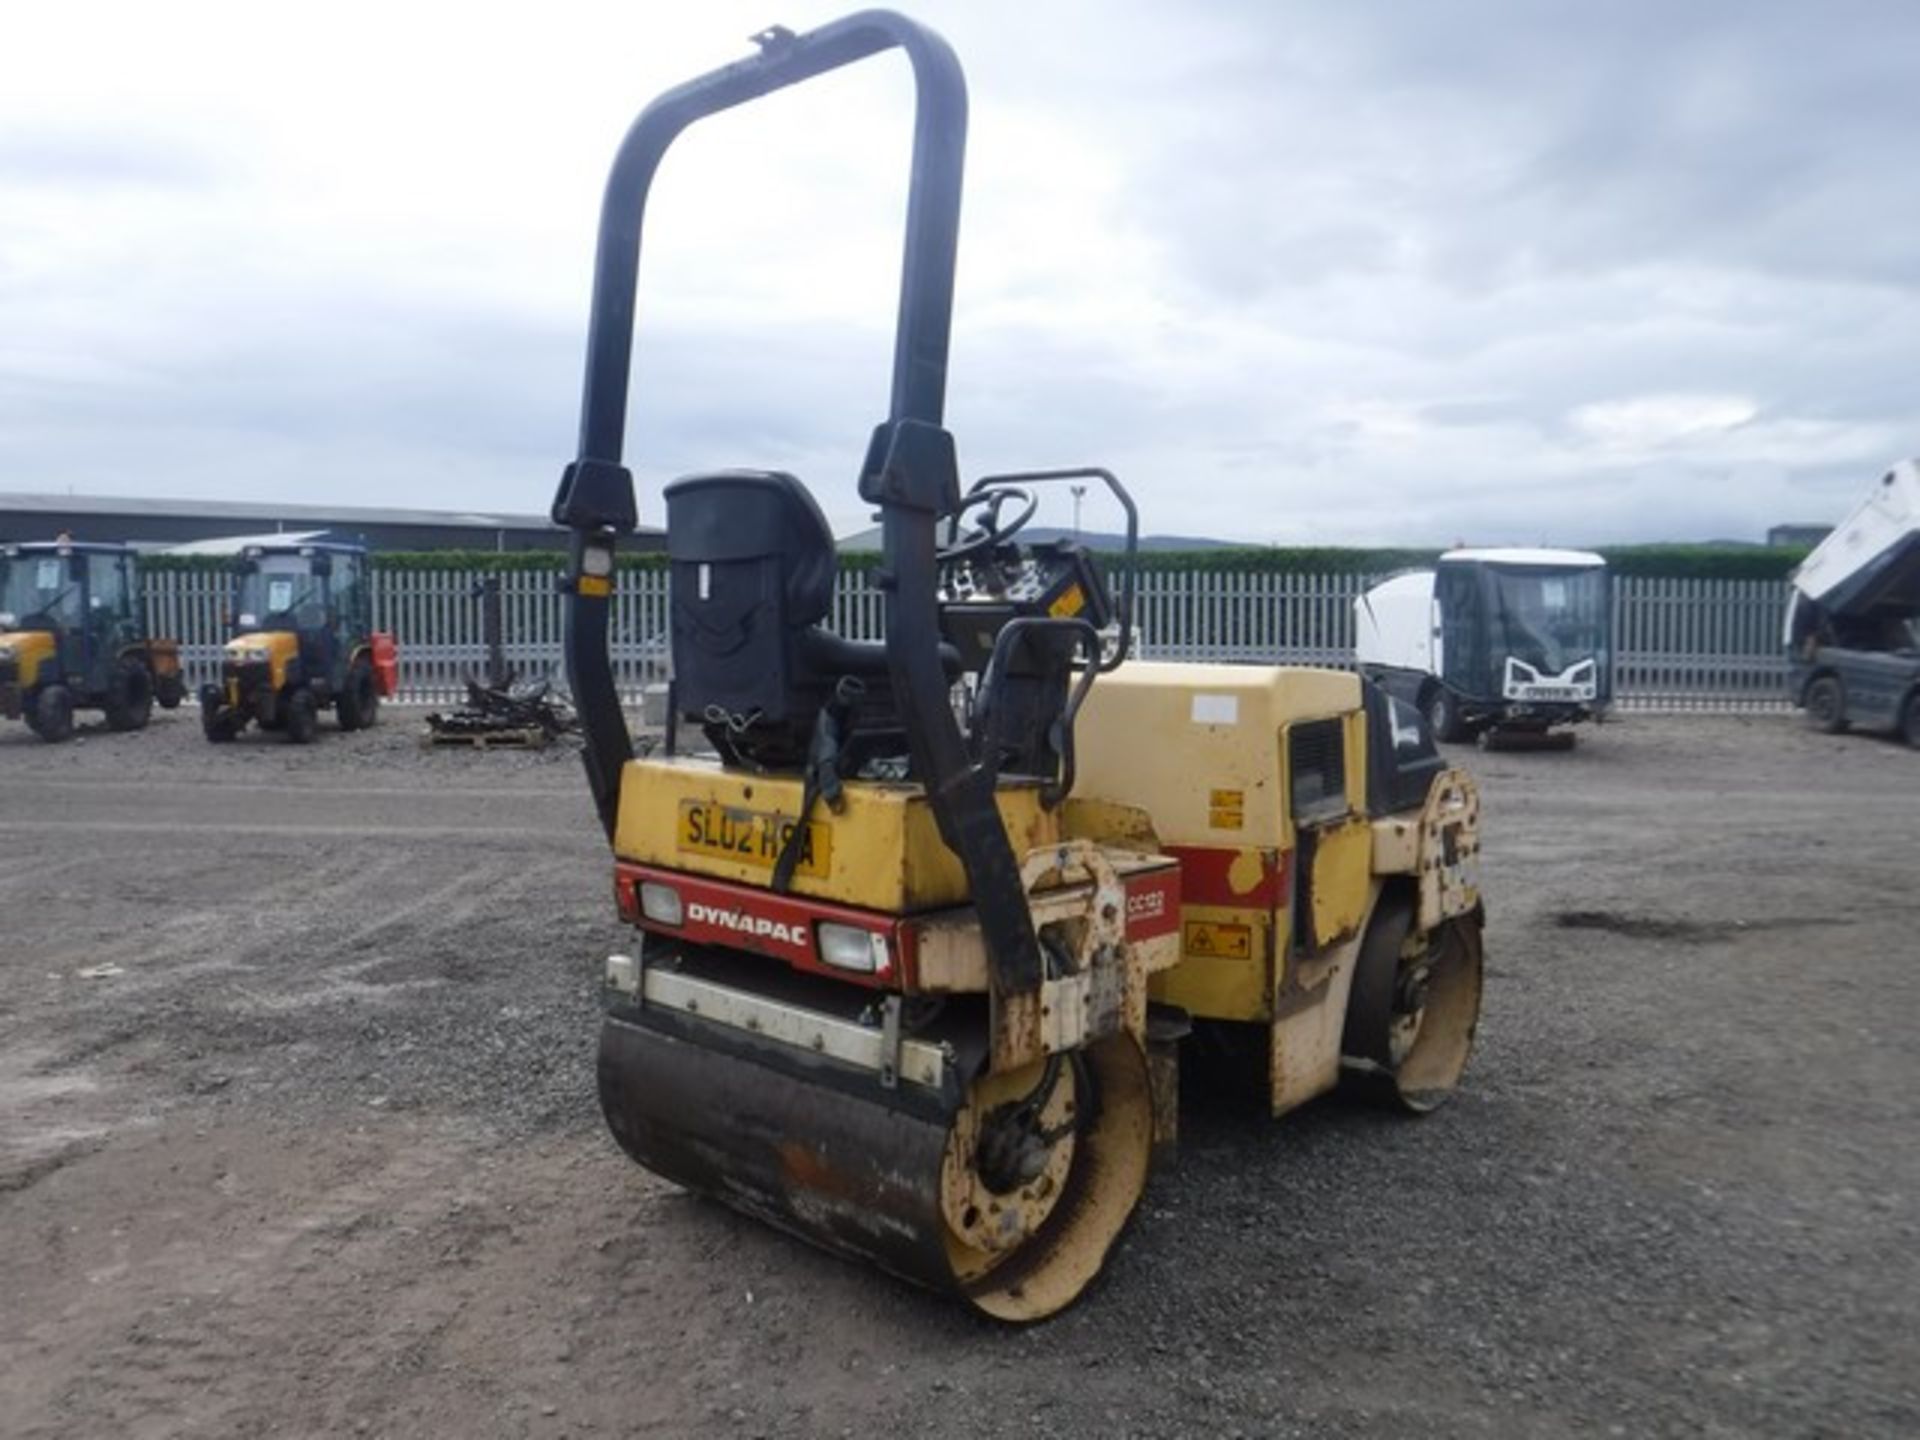 2002 DYNOPAC double drum roller. Service history. Reg No SL02 HSA. 2000hrs (not verified) - Image 10 of 14